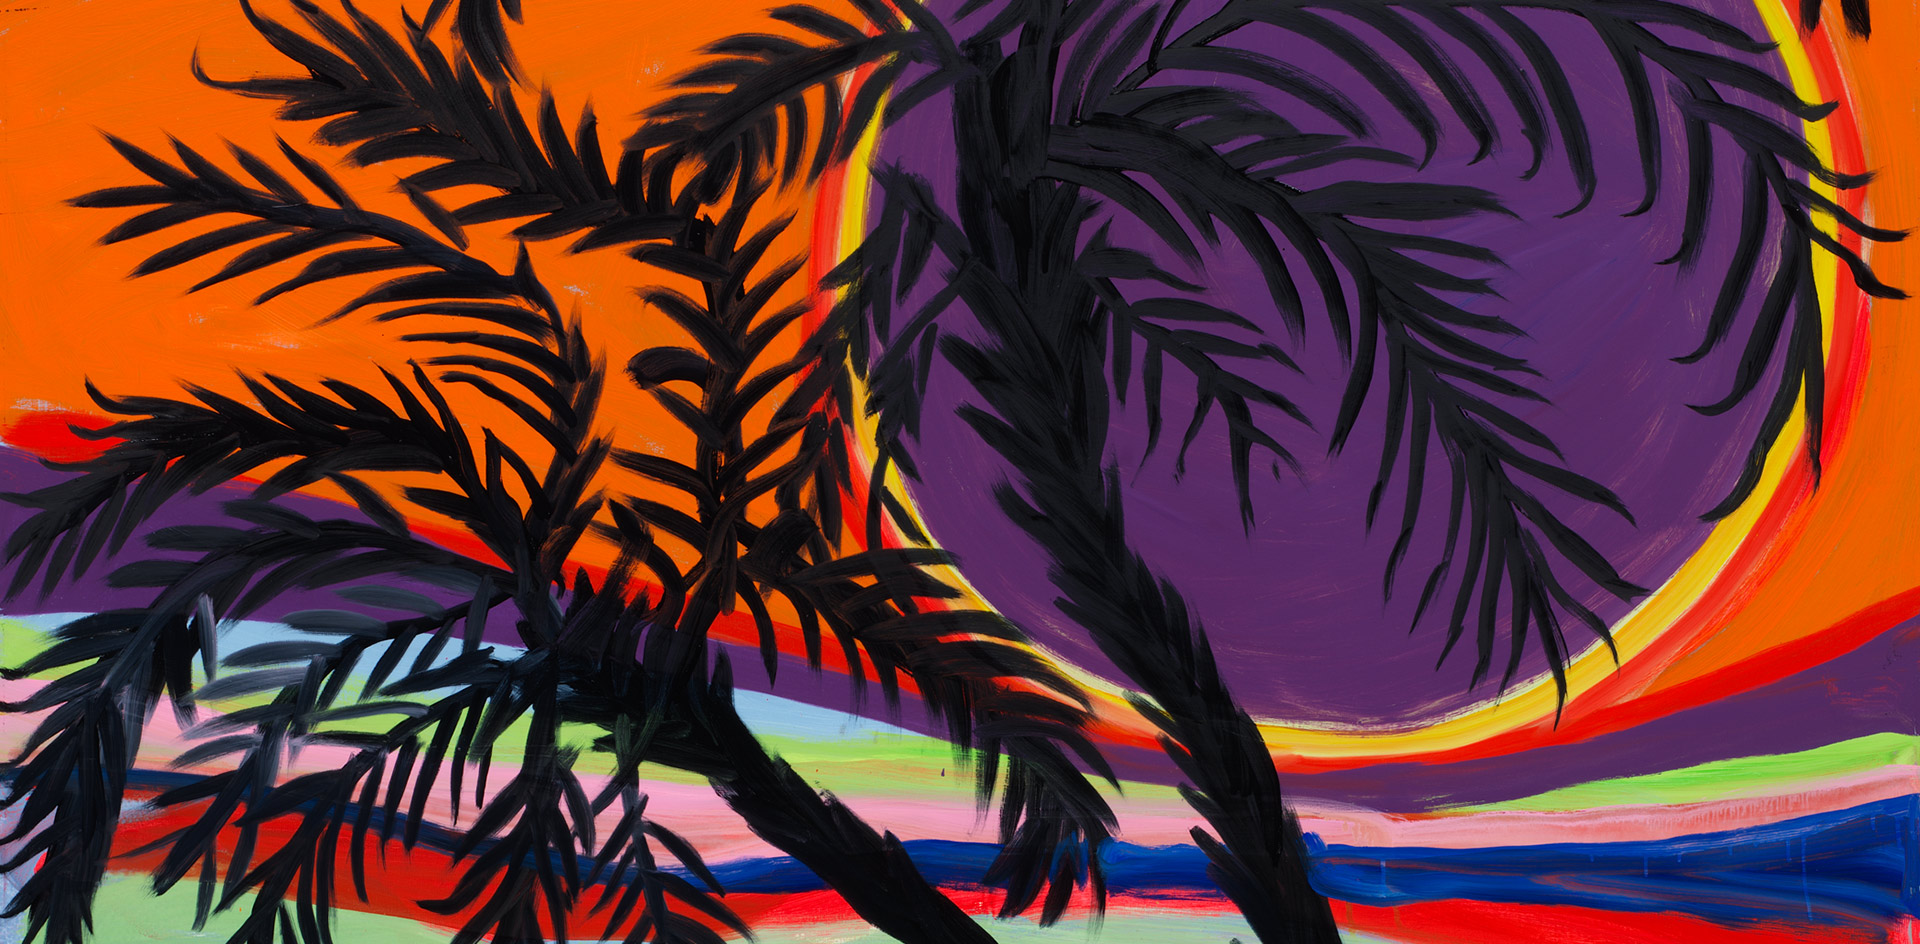 A detail from a painting by Josh Smith, titled Karma Palms #4, dated 2019.